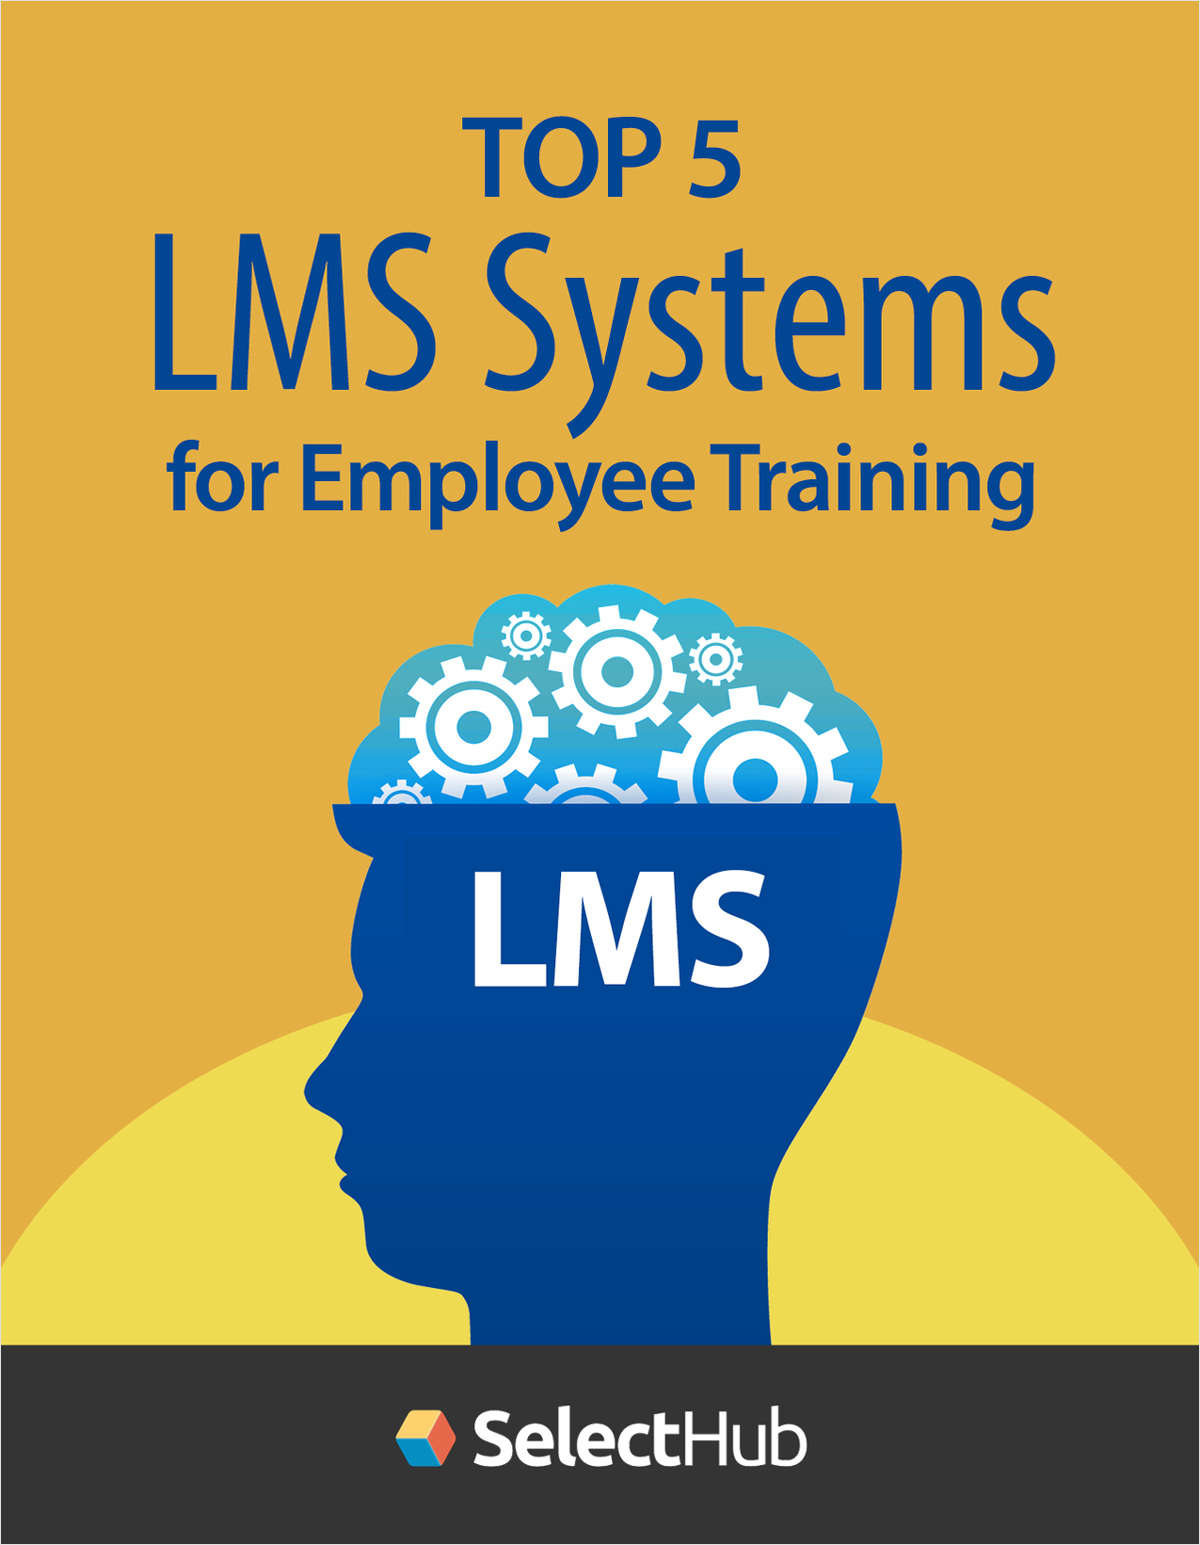 Top 5 LMS Systems for Employee Training--Essential Features & Pricing Comparison